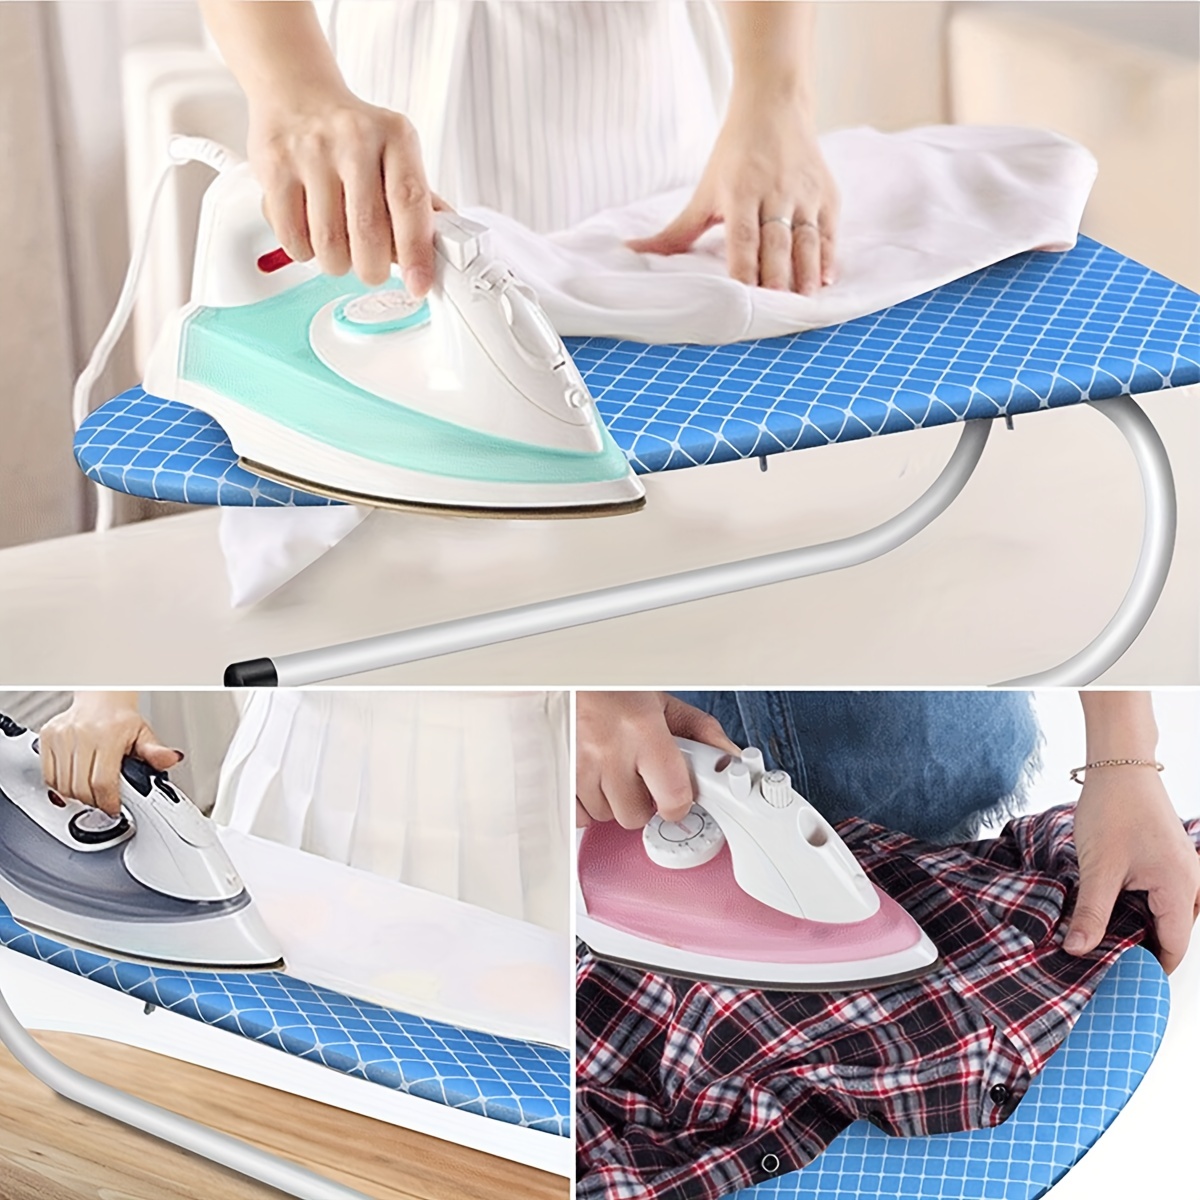 Portable Mini Ironing Board Rack for Clothes, Sleeves and Shirts